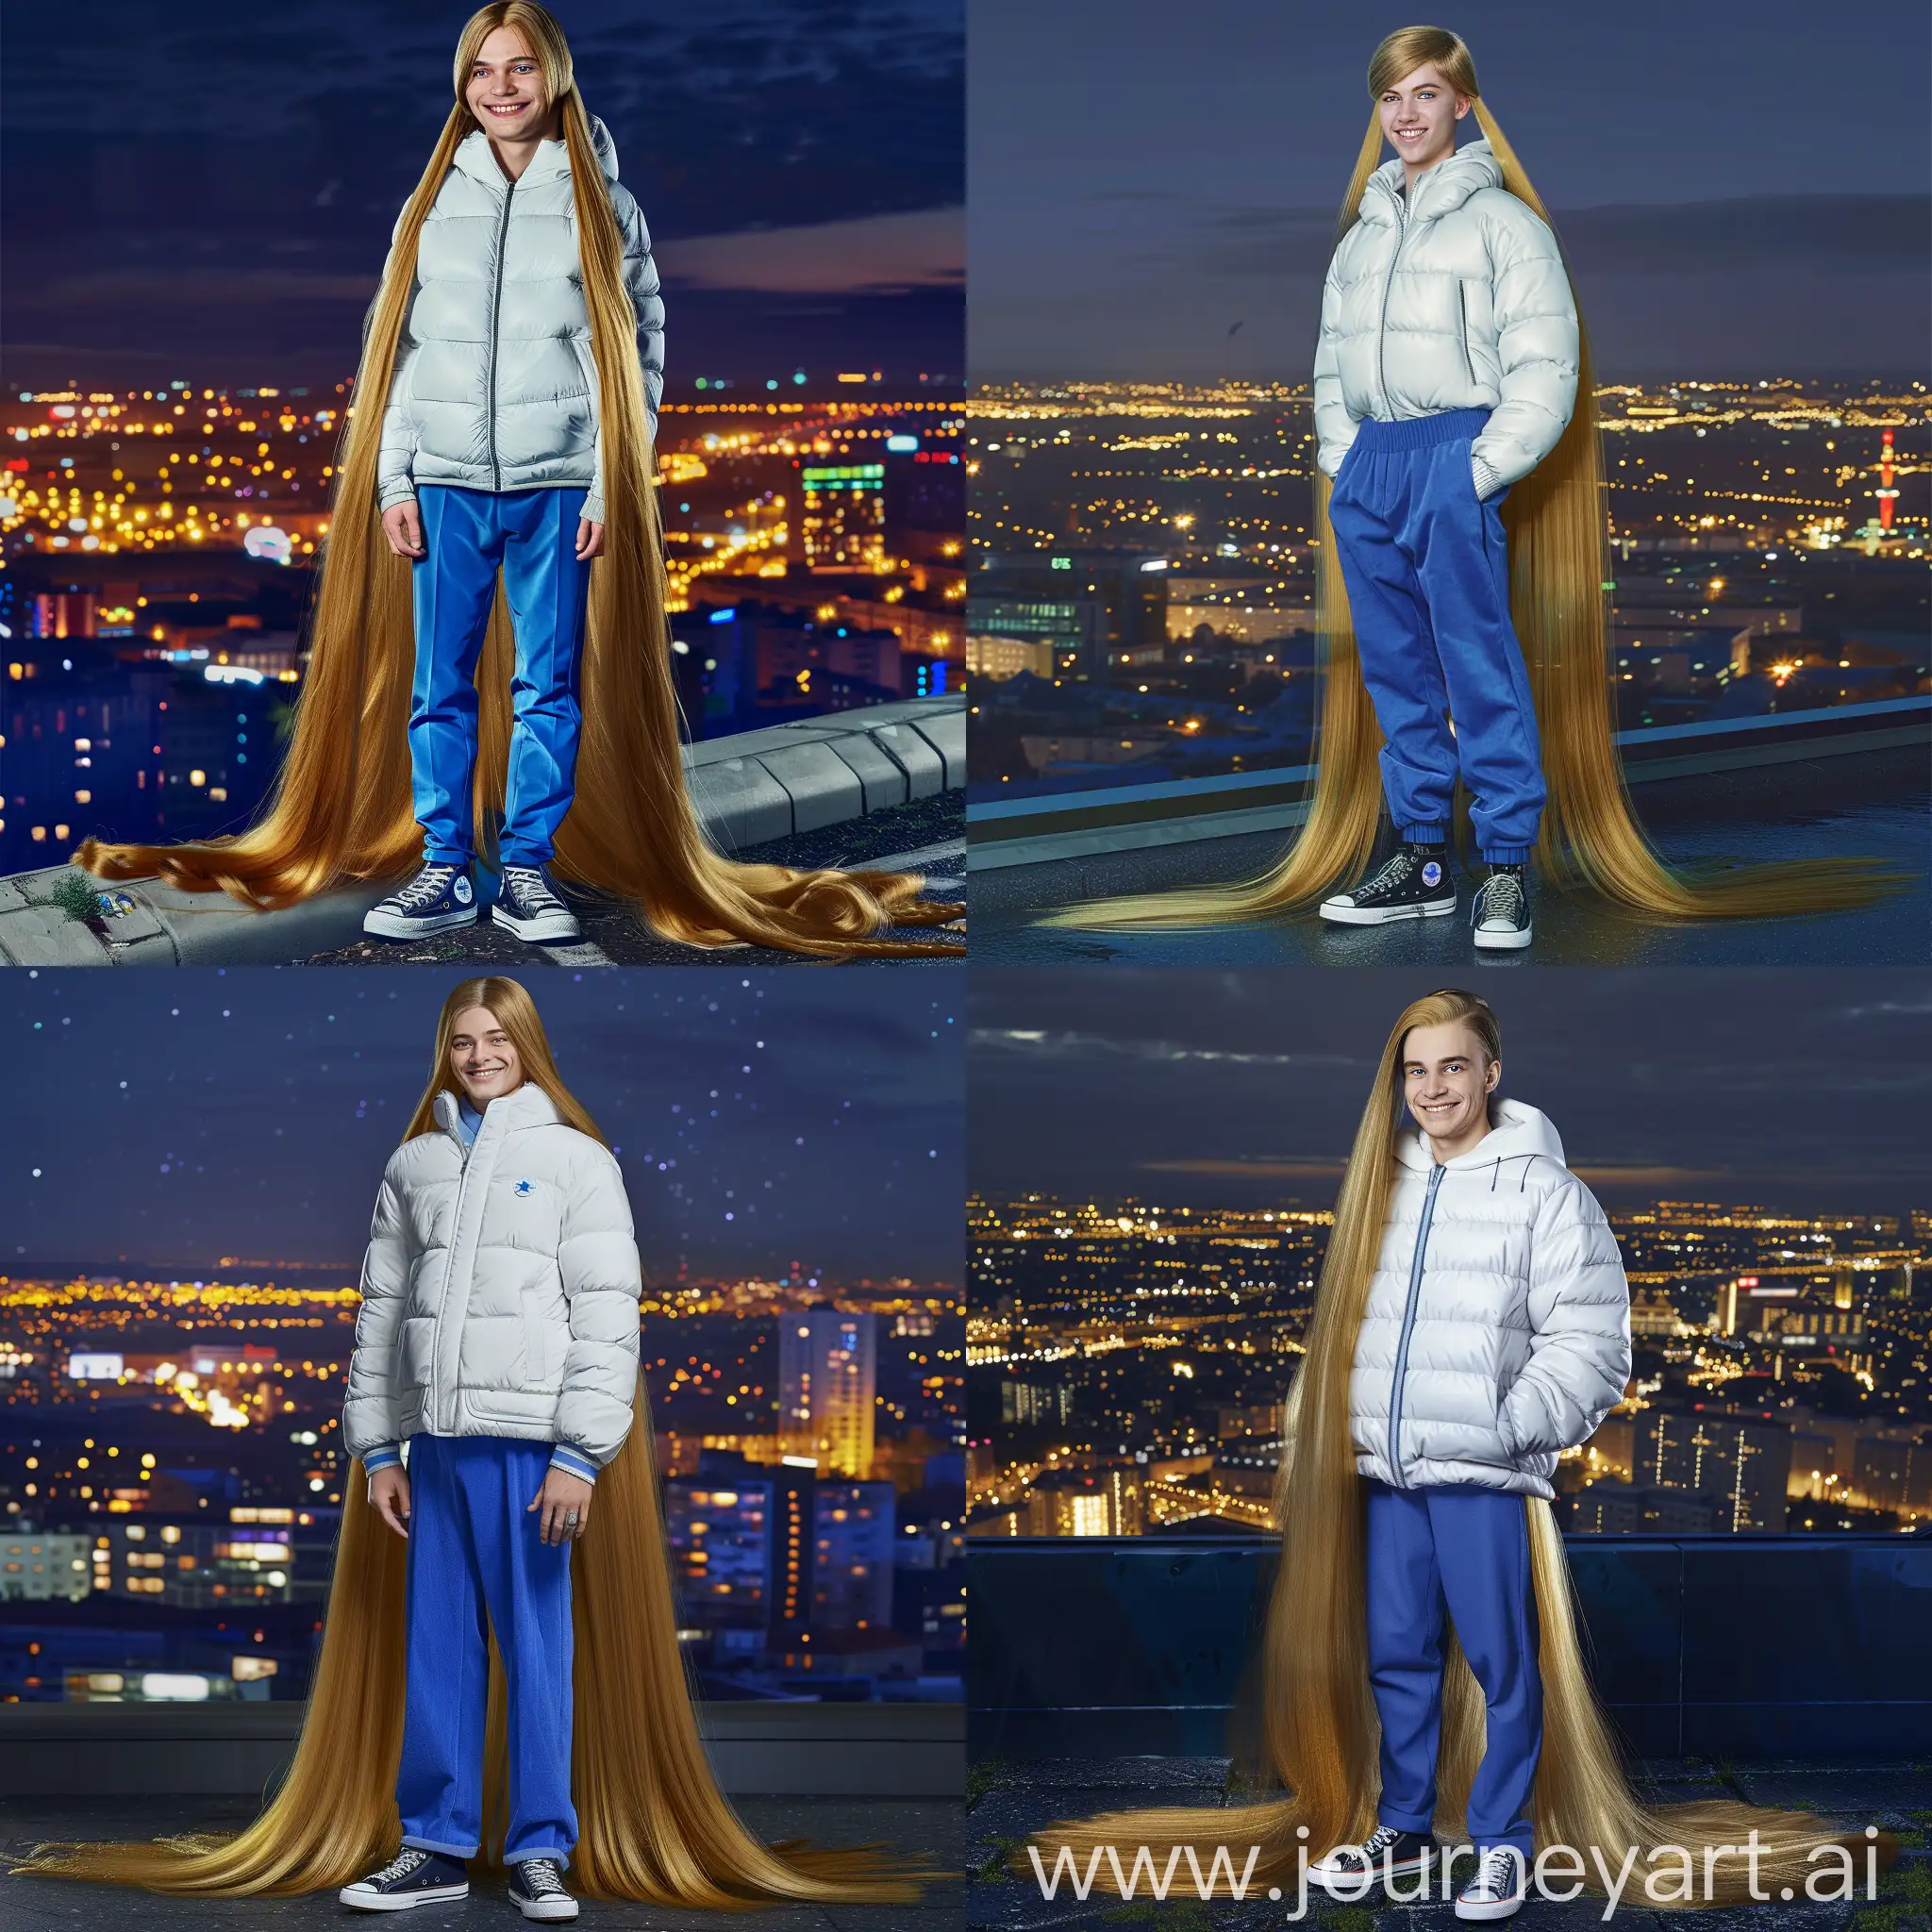 Smiling-Young-Man-with-Long-Golden-Hair-in-City-Night-Scene